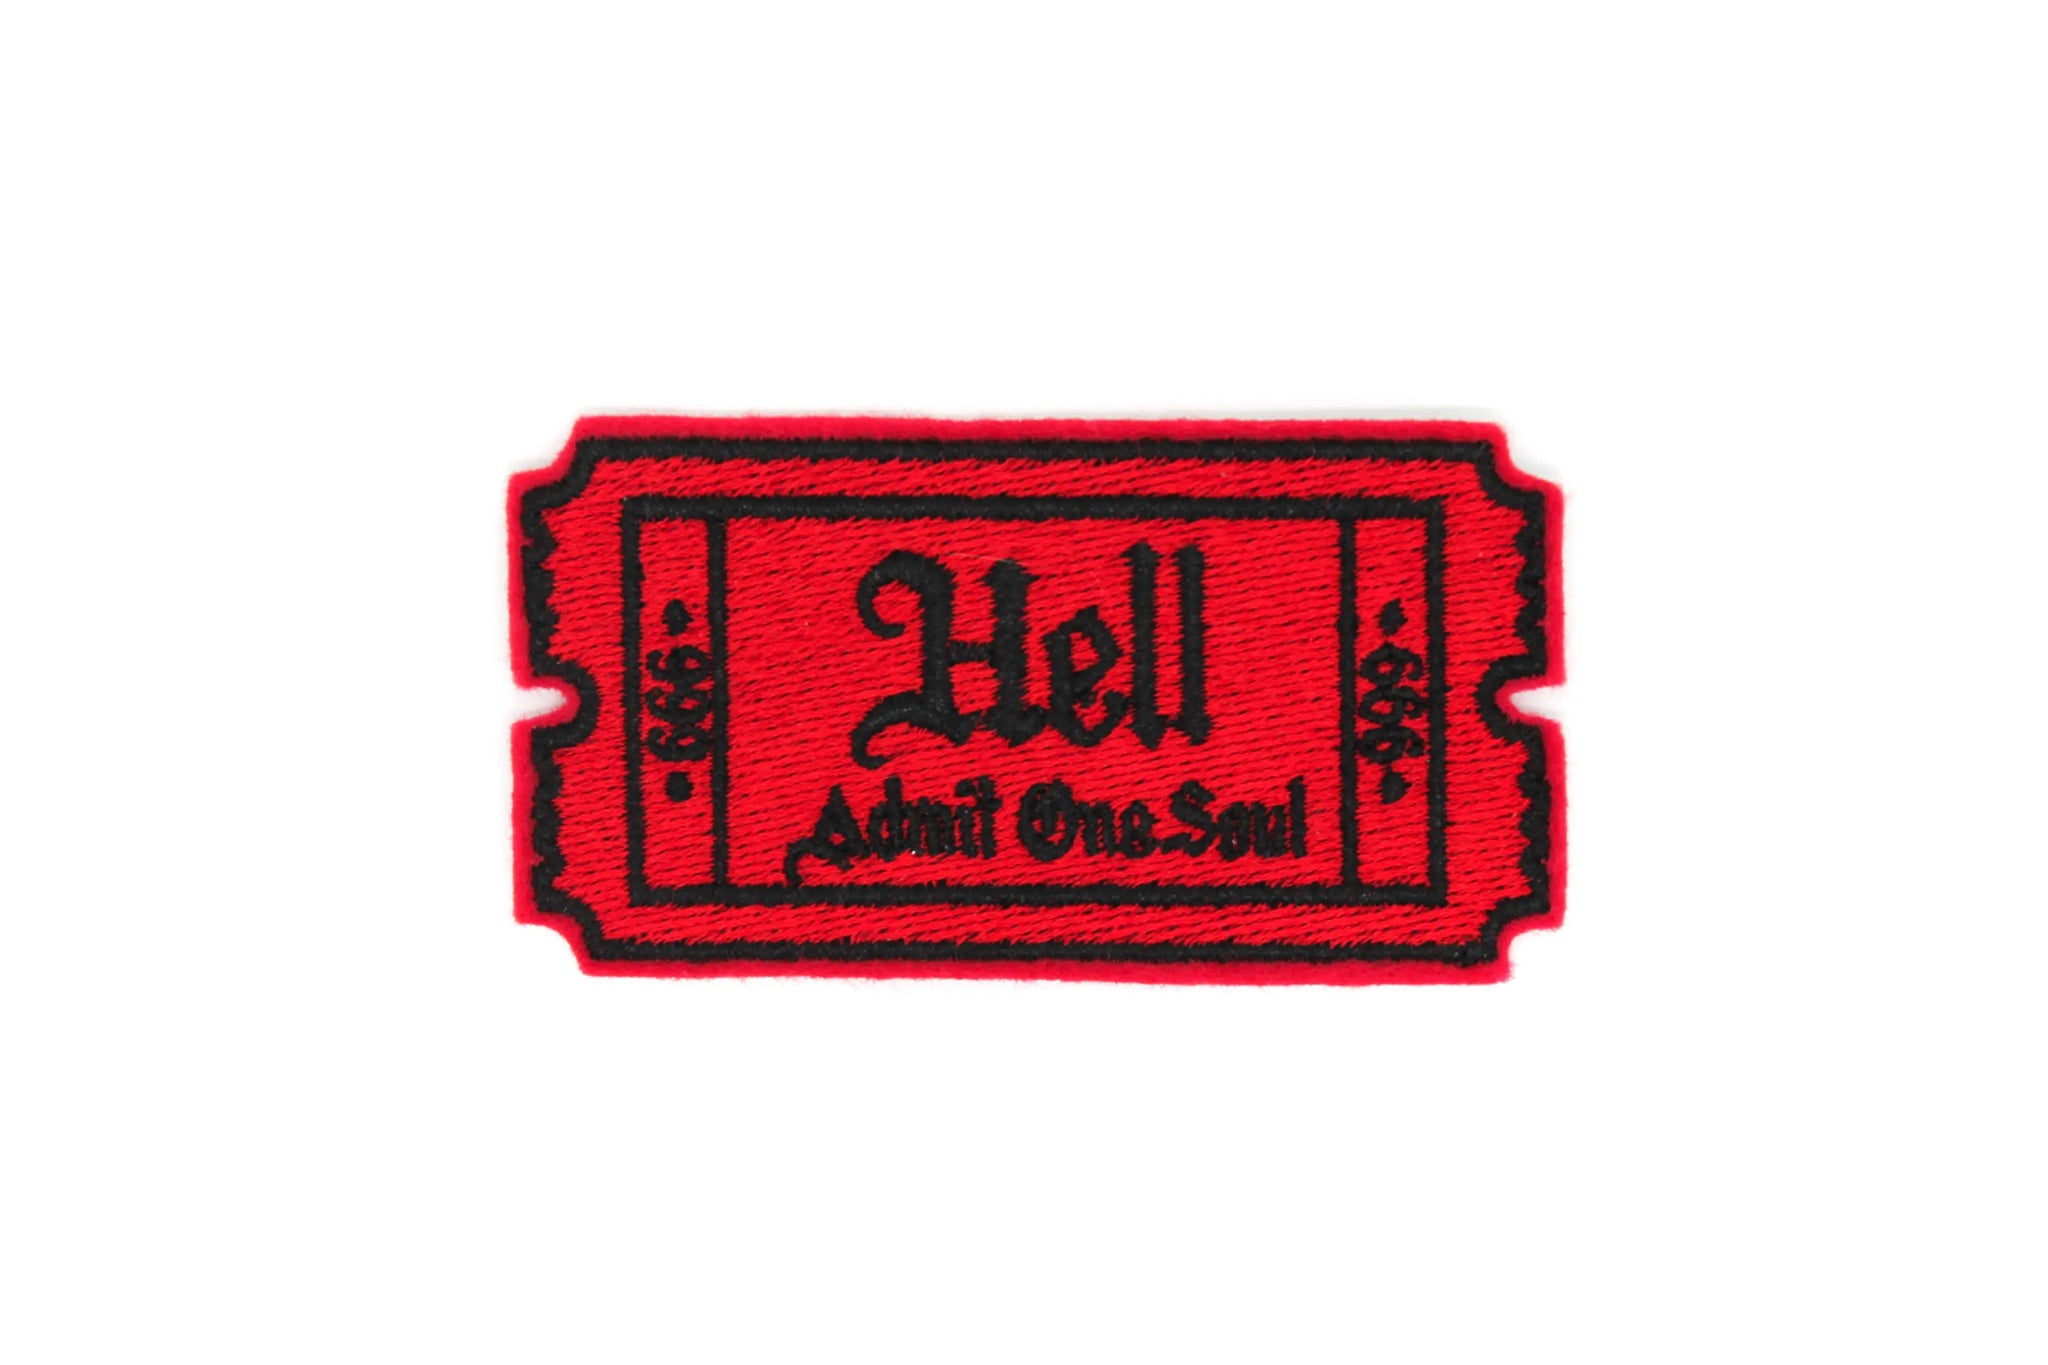 An embroidered patch in the shape of a ticket stitched in red with black writing. It says “Hell” and “Admit One Soul” below. On both sides of the ticket are the number 666